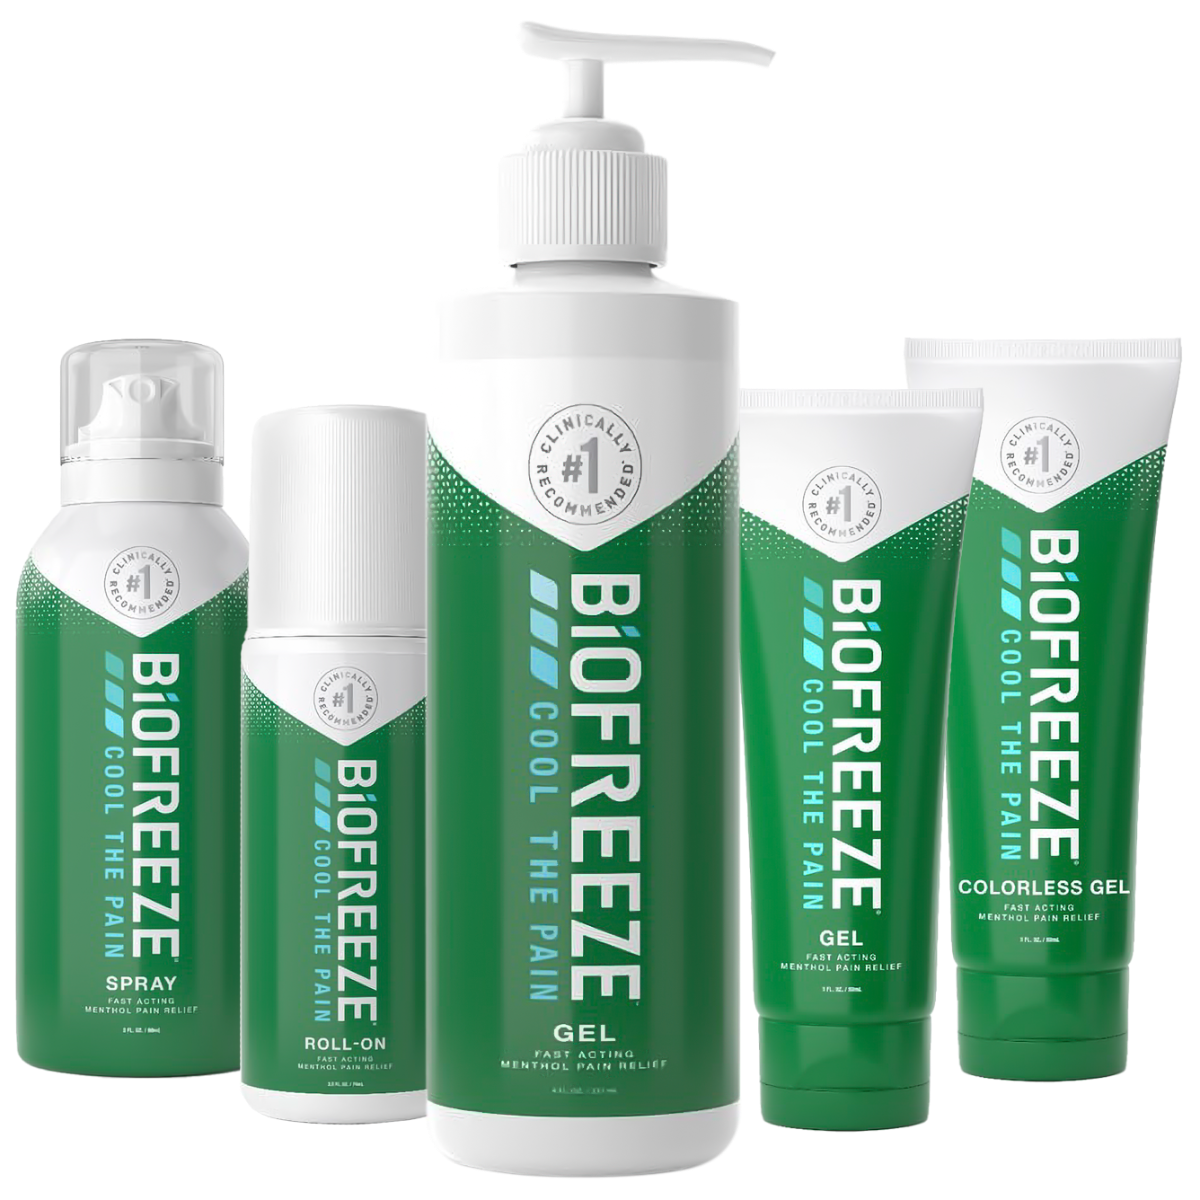 3 different Biofreeze products for fast acting pain relief: spray bottle, squeeze bottle & roll-on.